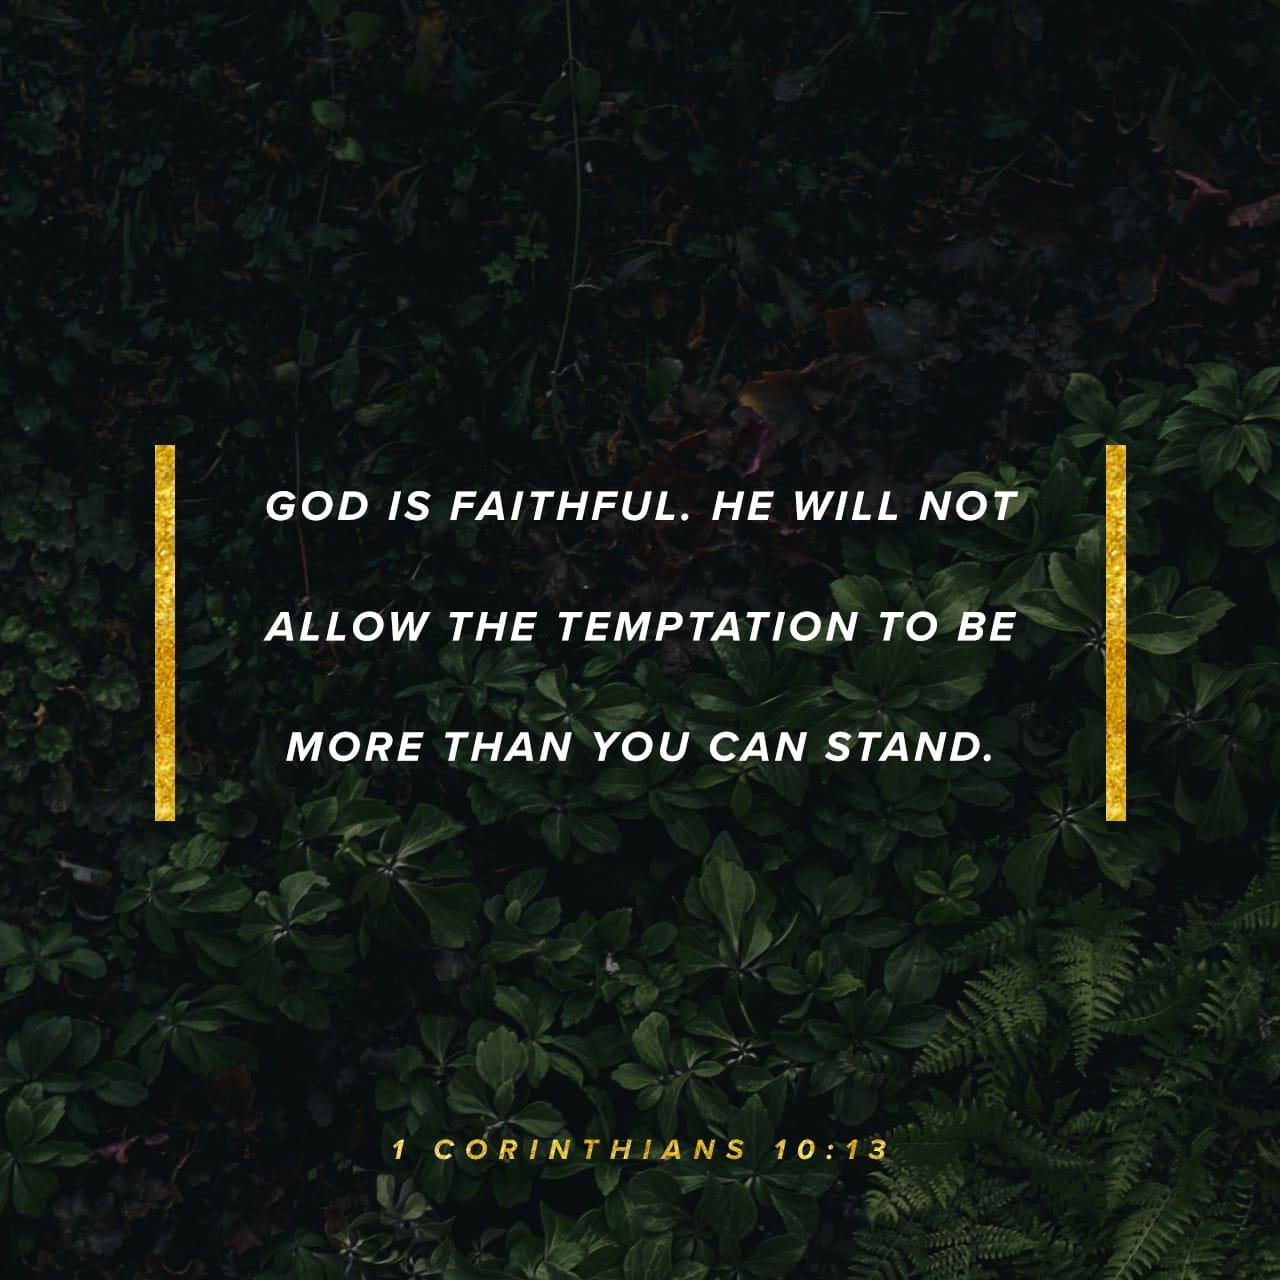 Bible Verse of the Day - day 87 - image 2443 (1 Corinthians 10:13)